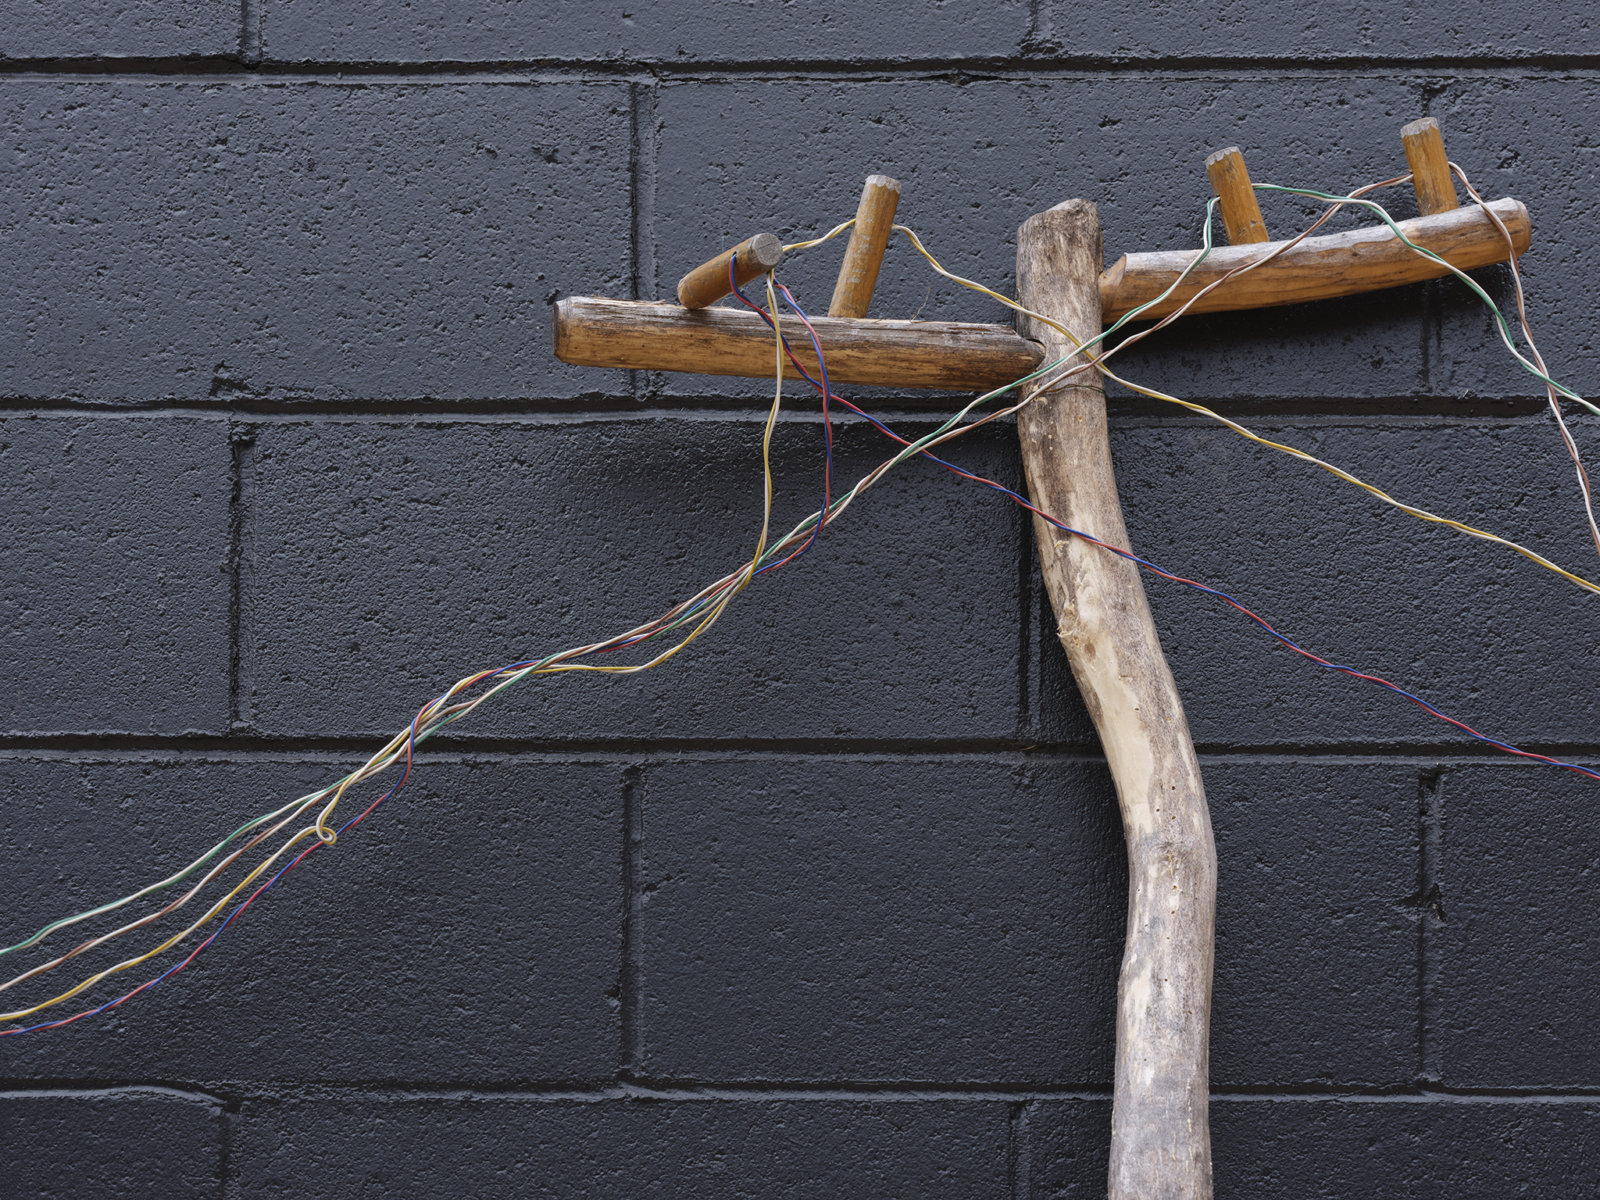 Ashes Withyman, Electrical poles from a place, near the buried canal (detail), 2011–2012, wire, steel, wood, glass bottles, dimensions variable